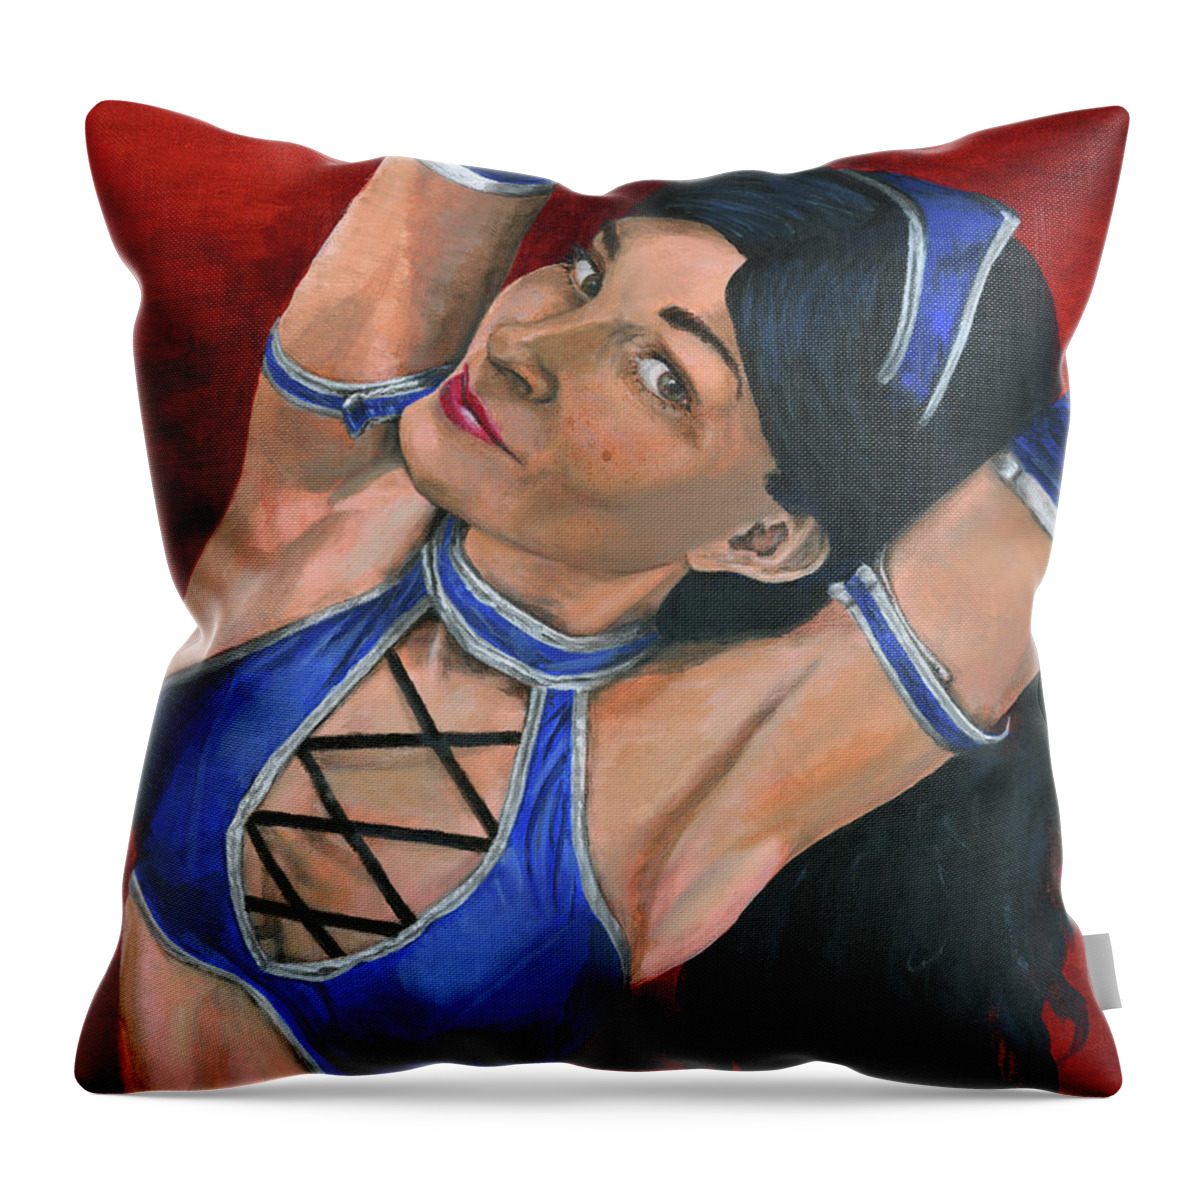 Cosplay Throw Pillow featuring the painting Kitana by Matthew Mezo